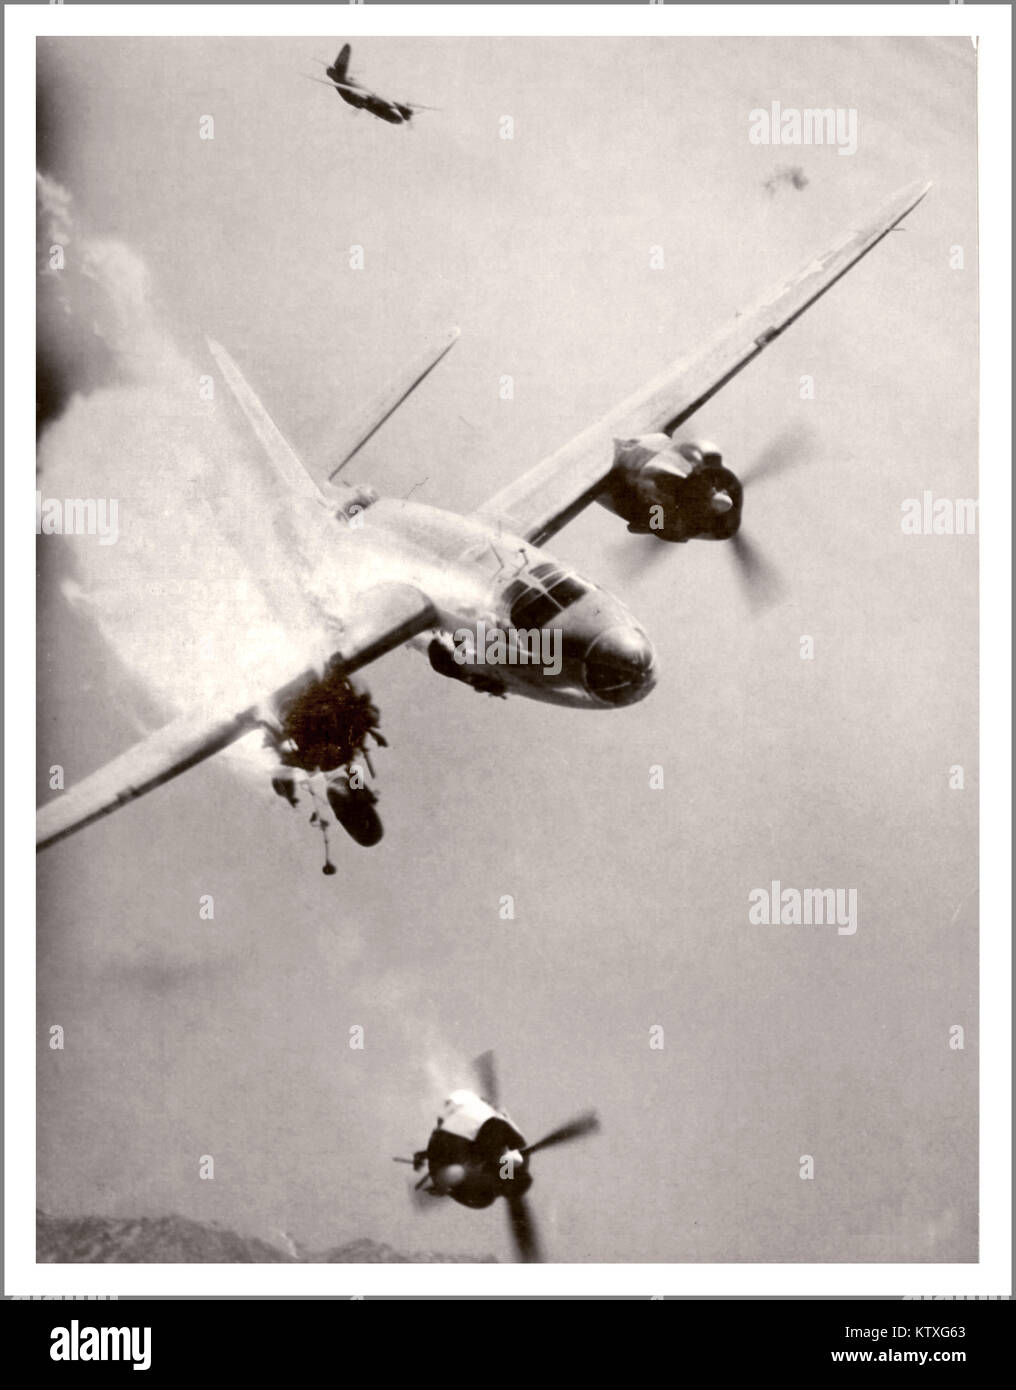 WW2 American Airforce USAAF B26 Bomber shot down in flames over France. Grim remarkable aerial war image, of crippled American B-26 Marauder aircraft after a direct hit by a Nazi German 88 mm flak shell over Toulon Harbour, Southern France. Starboard propeller and engine completely separated.. 3 out of the 6 crew survived this aerial combat incident.. Stock Photo